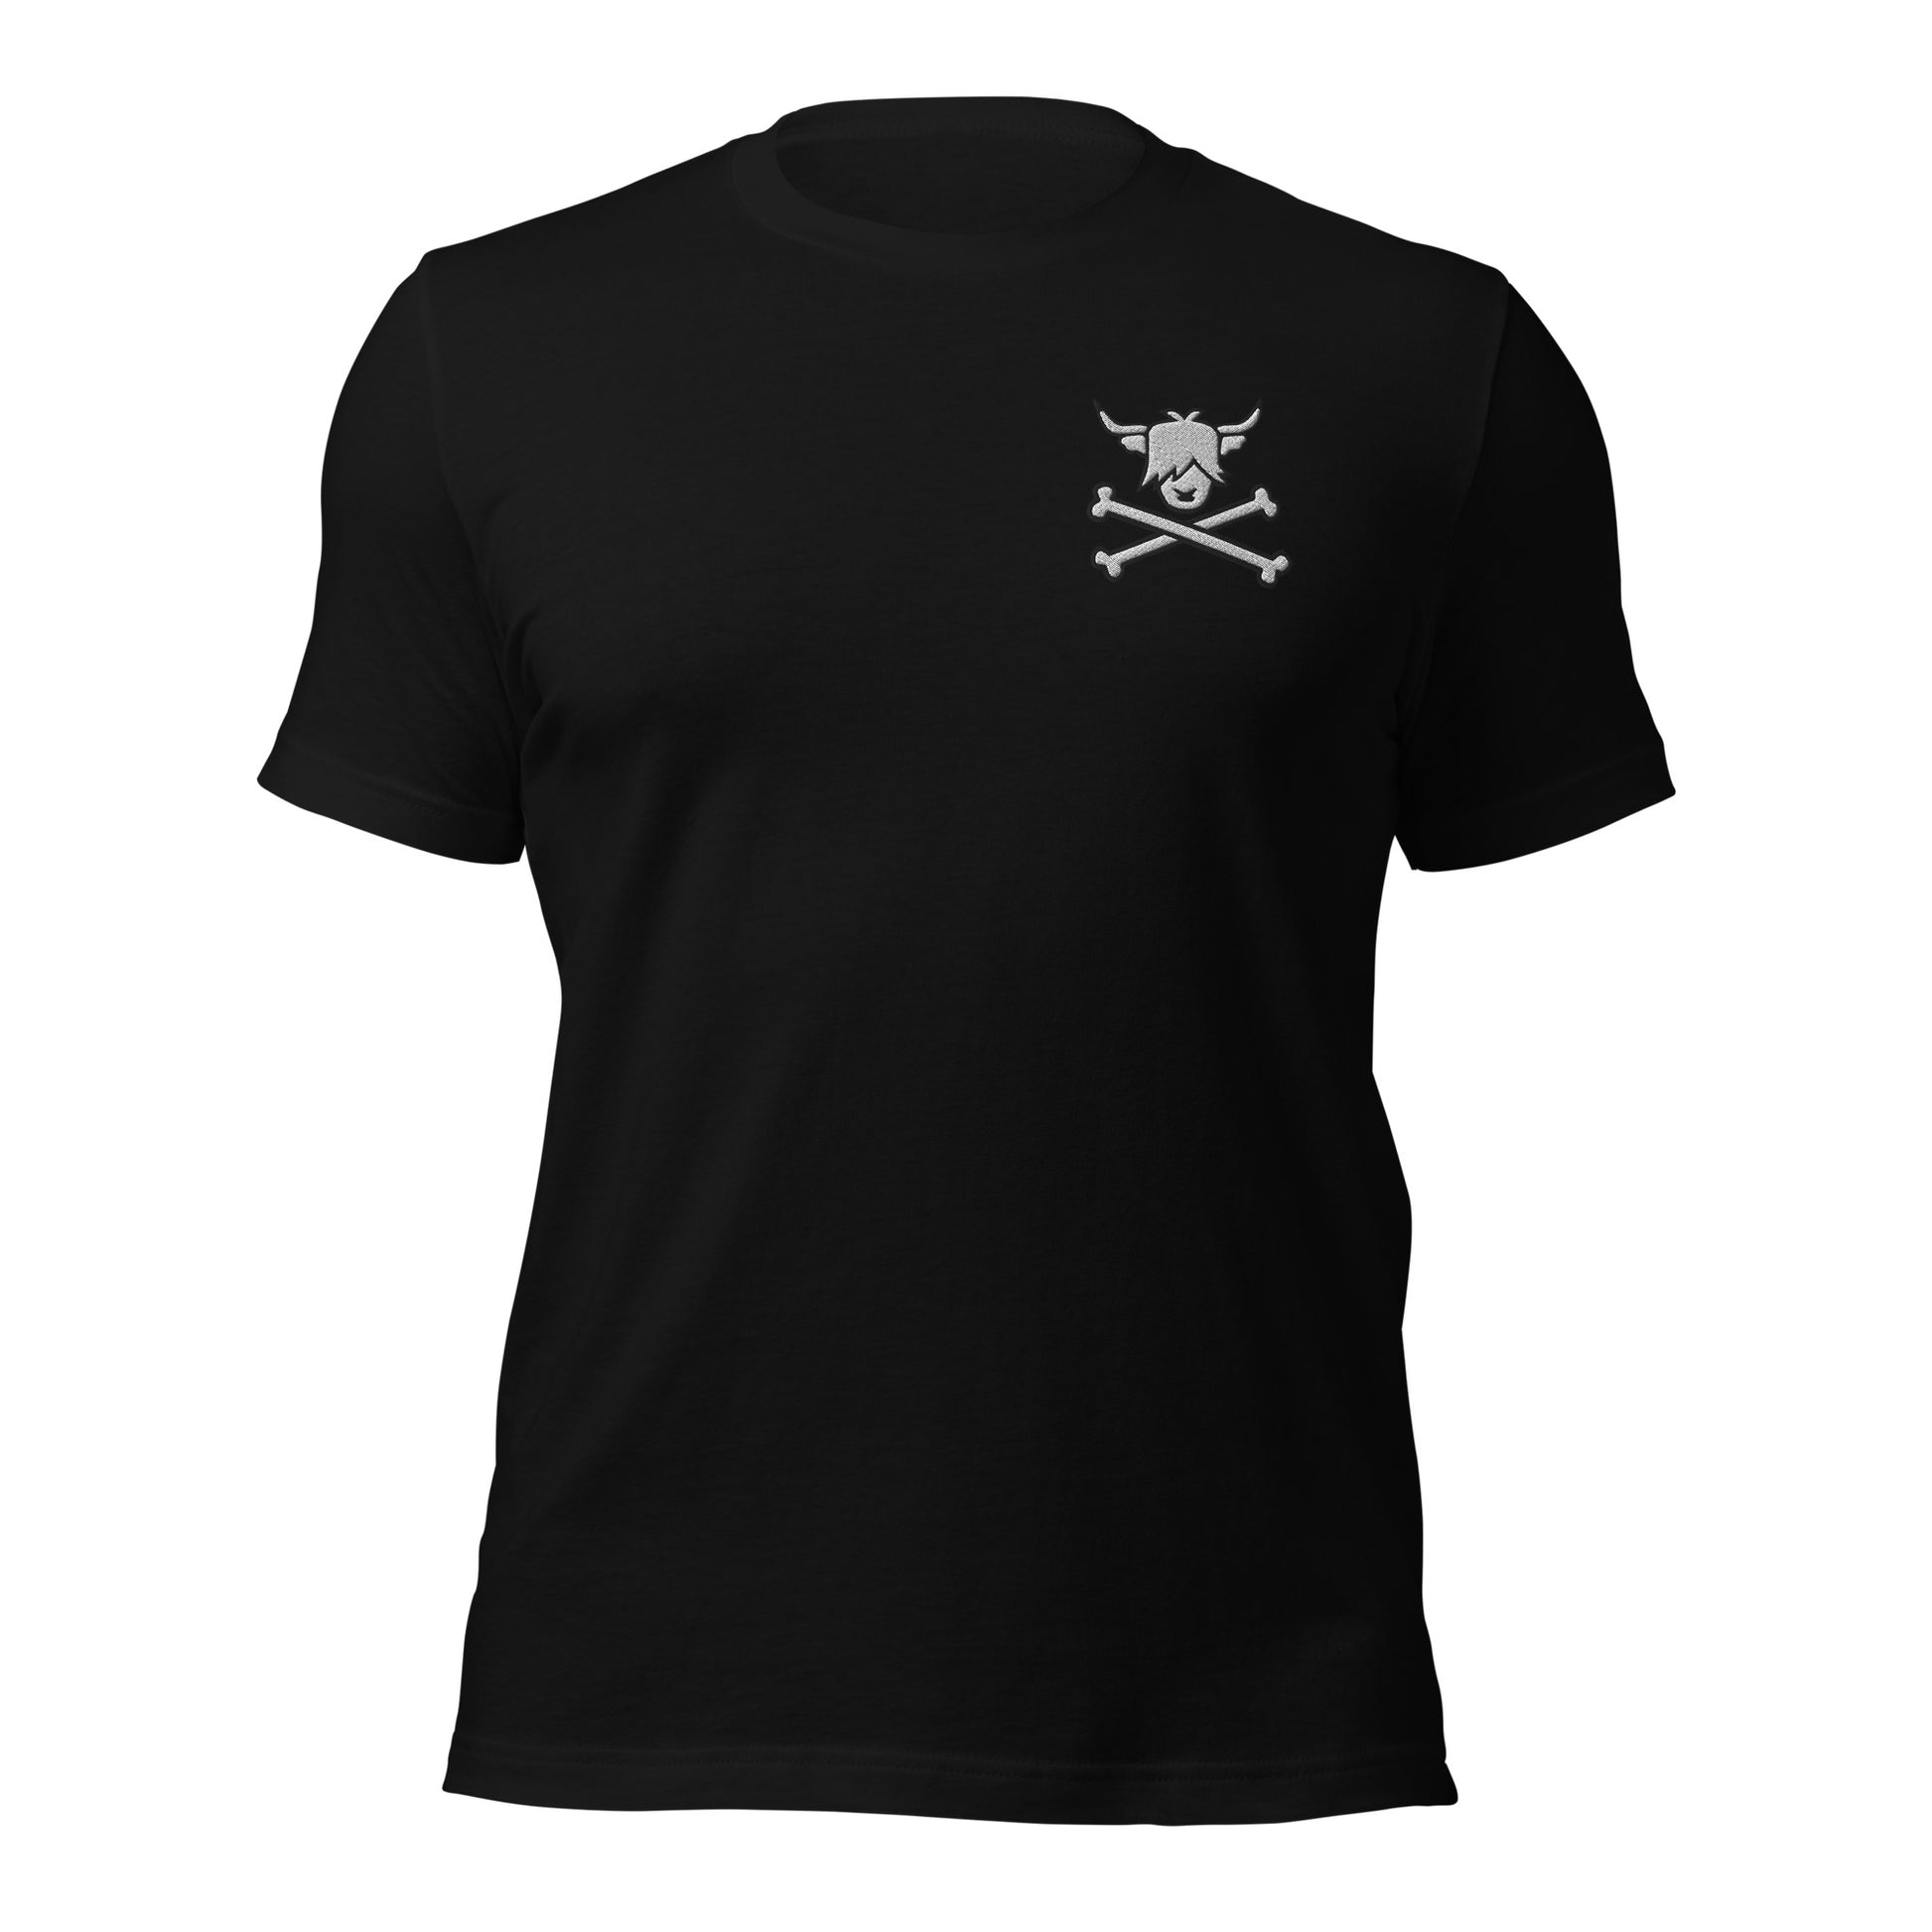 Black tshirt with embroidered cow